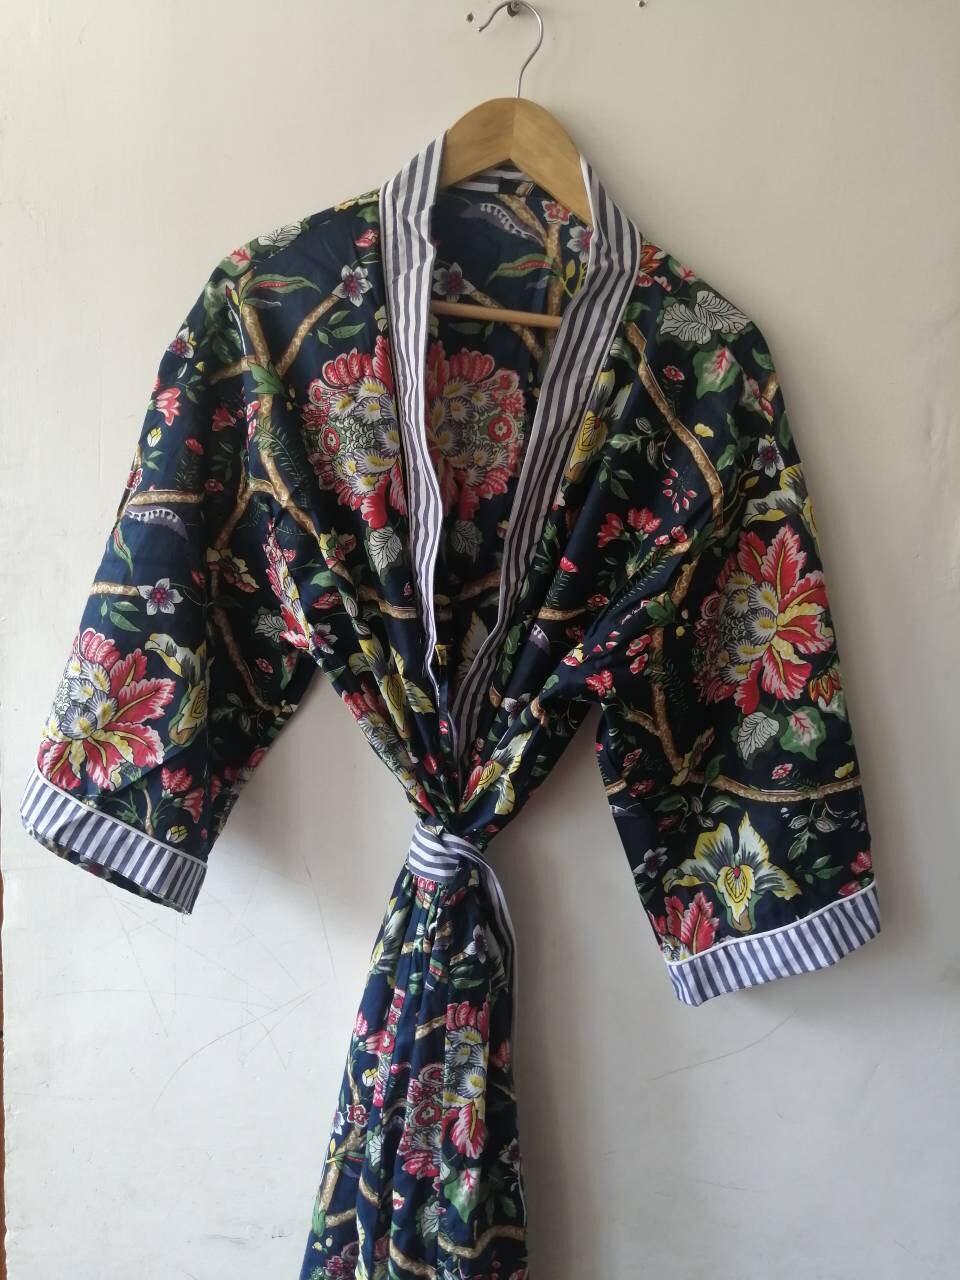 Cotton Kimono Women Wear Body Crossover Indian Robes Bridesmaid Dressing Gown Hand Patch Work Block Print Cotton Bathrobe Dressing Gown